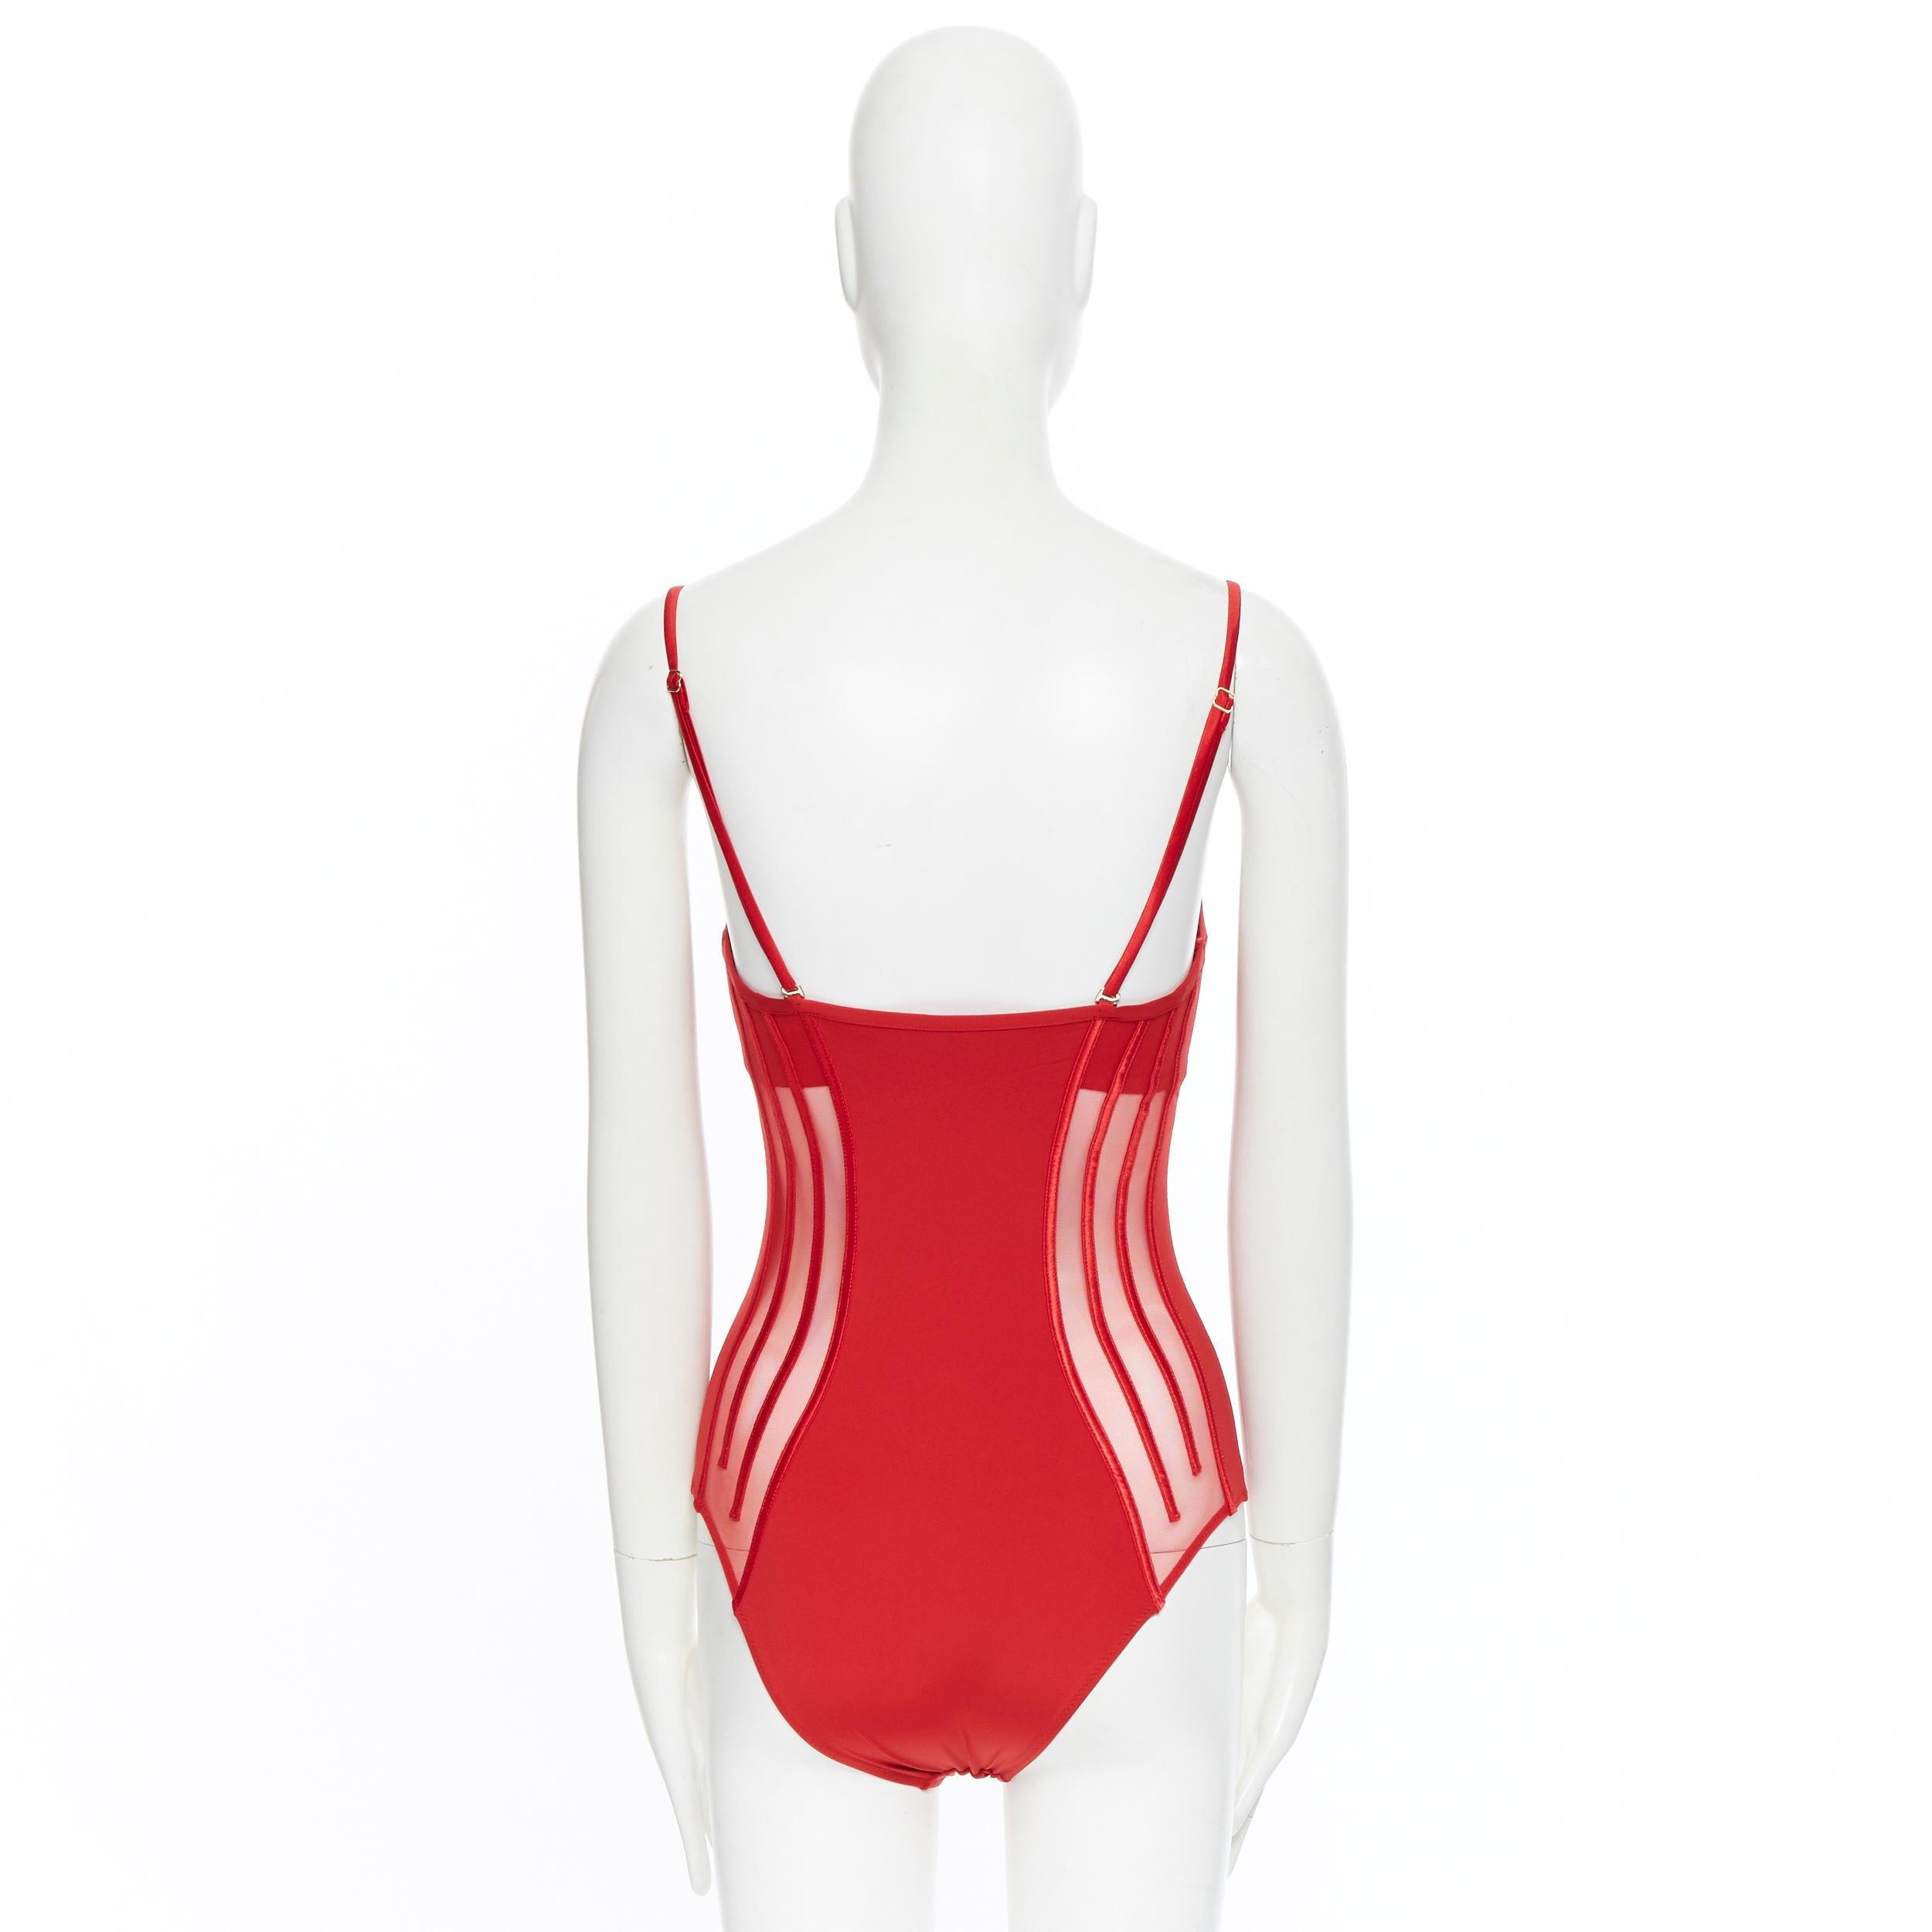 Red new LA PERLA Graphique Couture red boned sheer body monokini swimsuit IT44A M